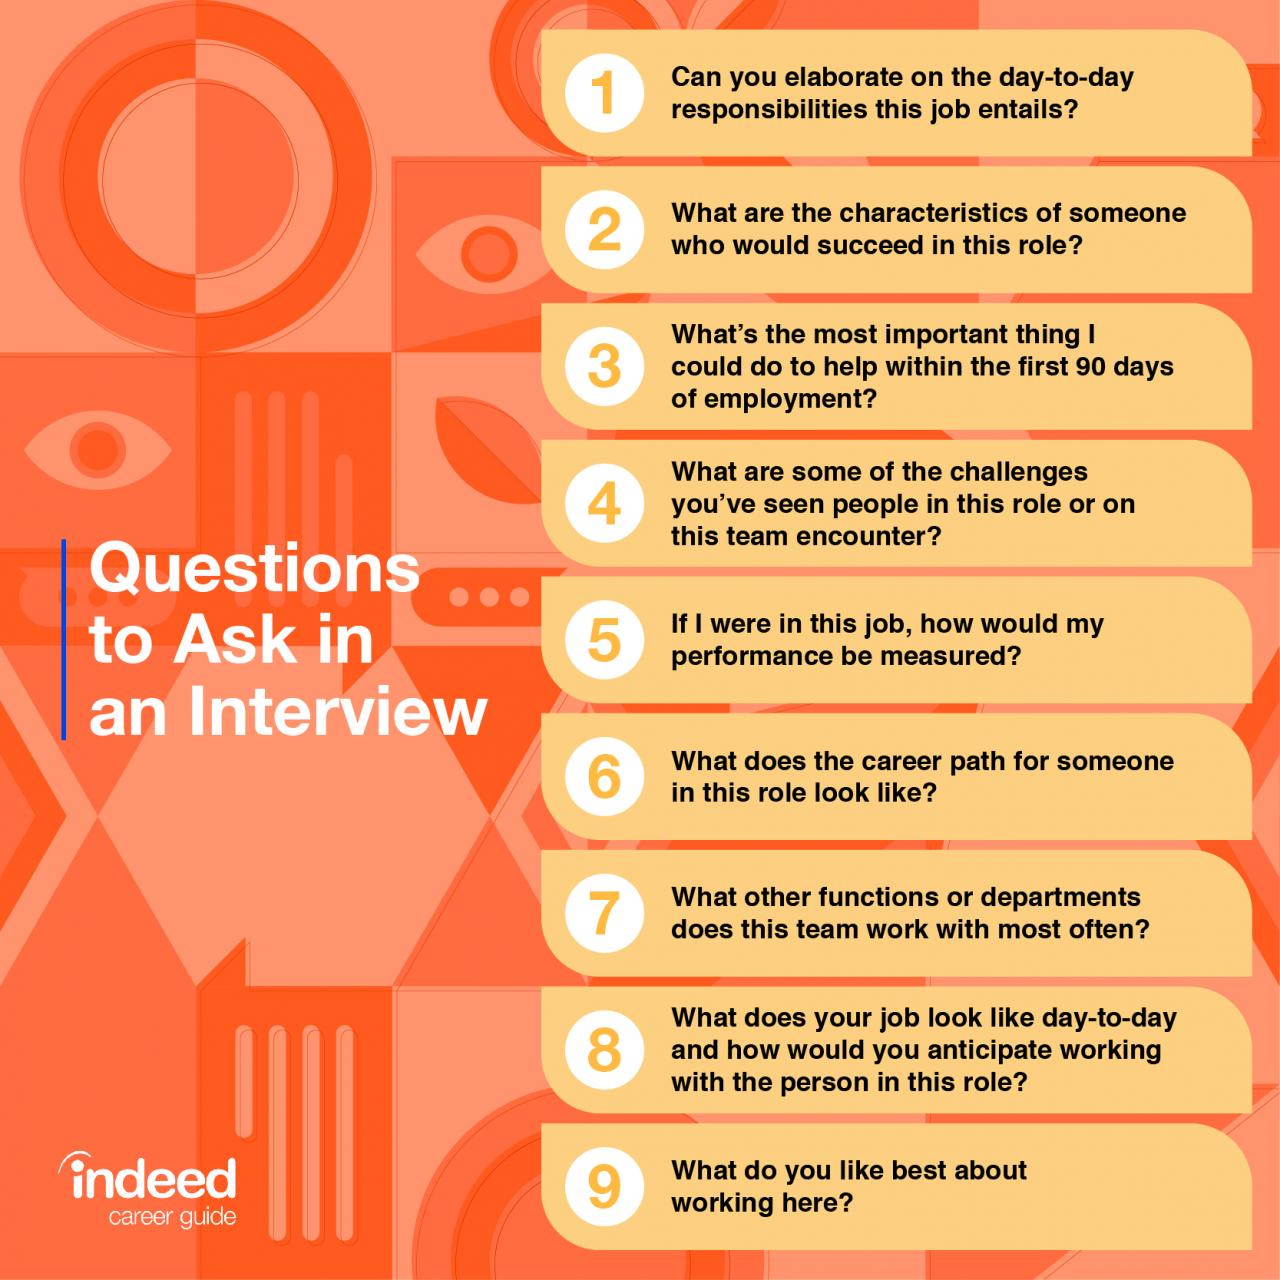 10 questions asked in an interview for a job